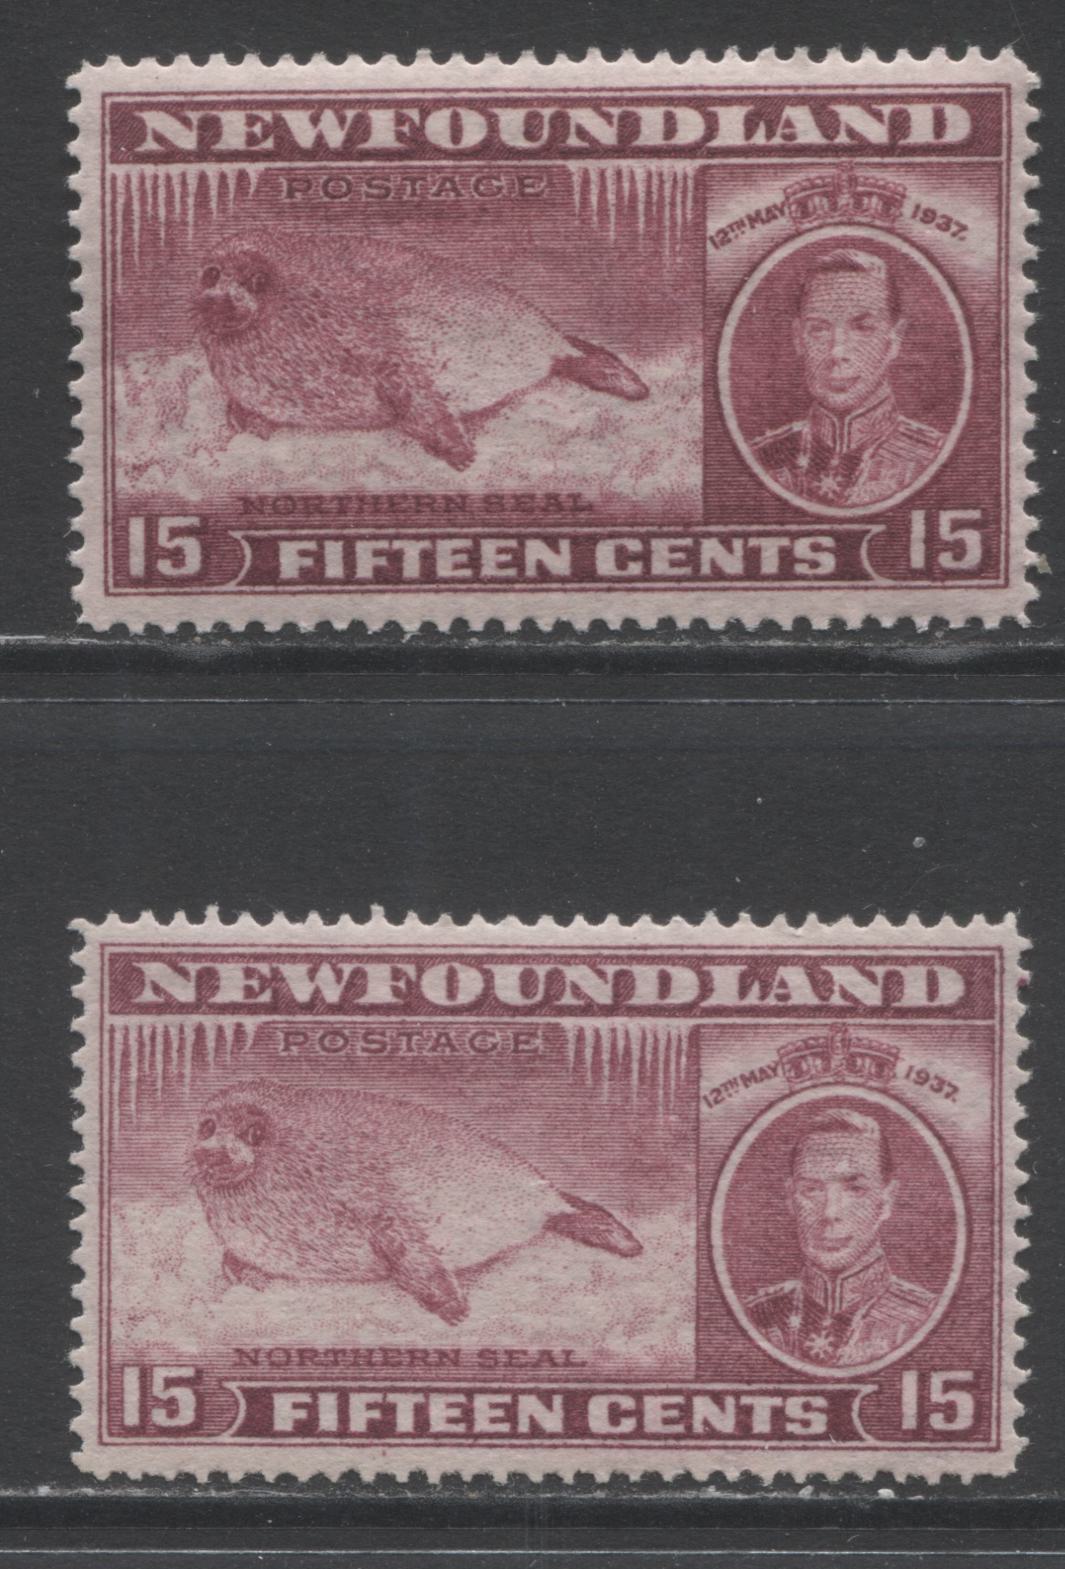 Lot 341 Newfoundland #239 15c Claret Harp Seal Pup, 1937 Long Coronation Issue, 2 VFNH Singles Showing Two Different Shades & Perfs